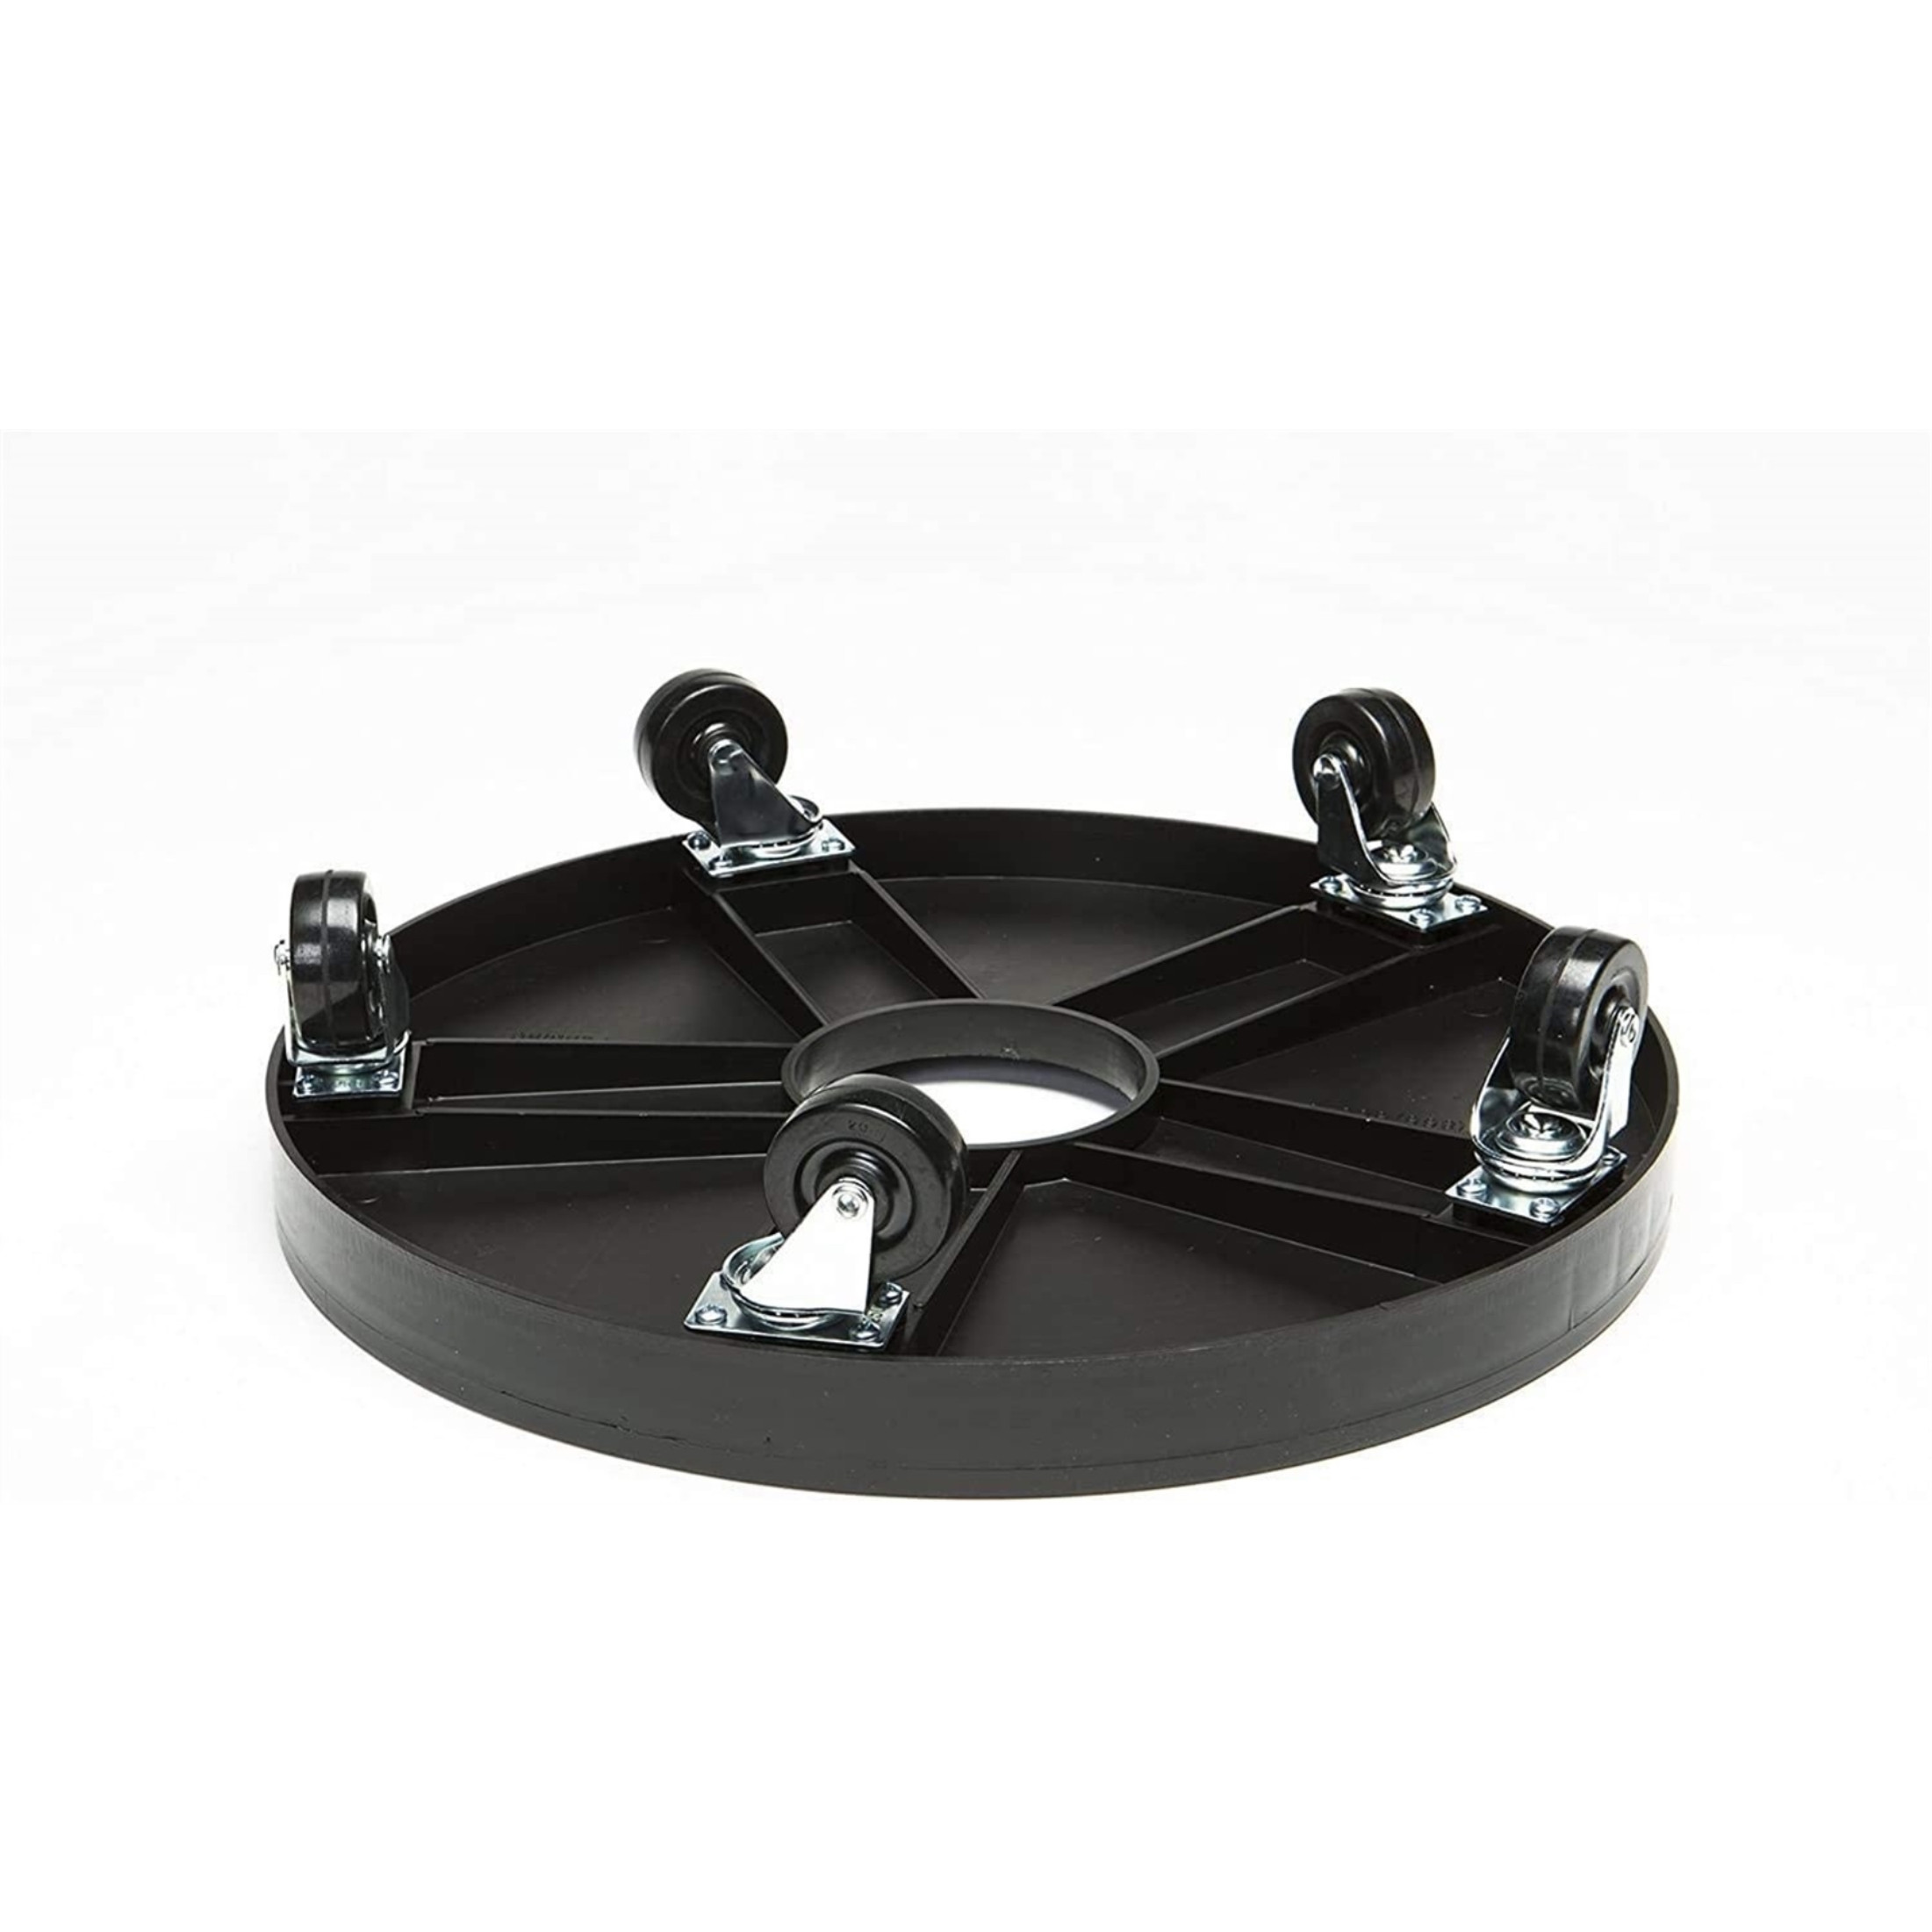 DeVault 16 Plant Dolly/Caddy Black With Hole